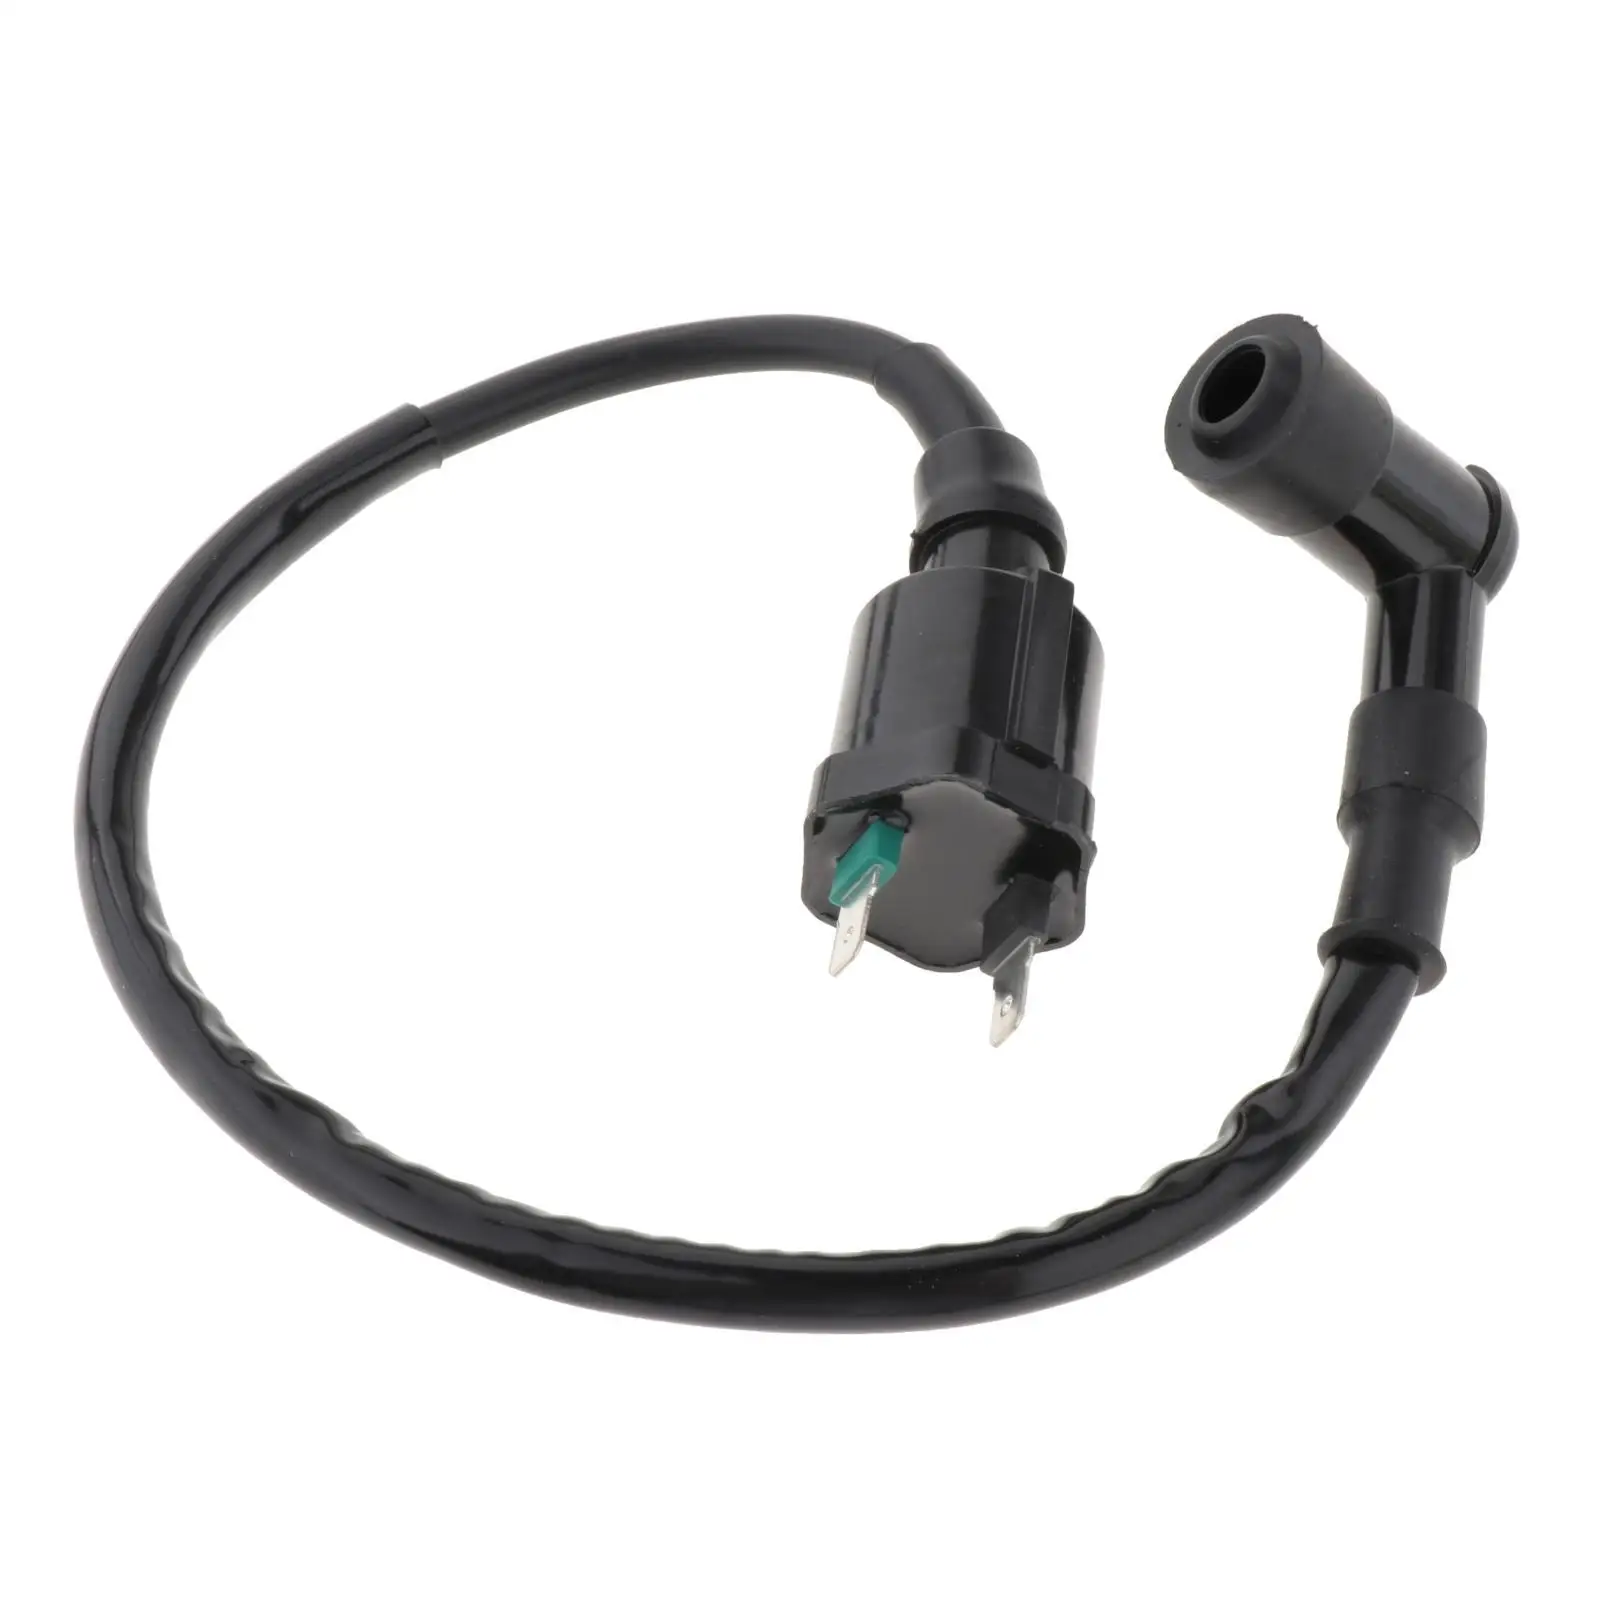 Boat Motor Ignition Coil Assembly 30513-Zv5-003 30511ZV5003 30512-Zv5-003 for Honda Outboard Motor BF30 to BF50